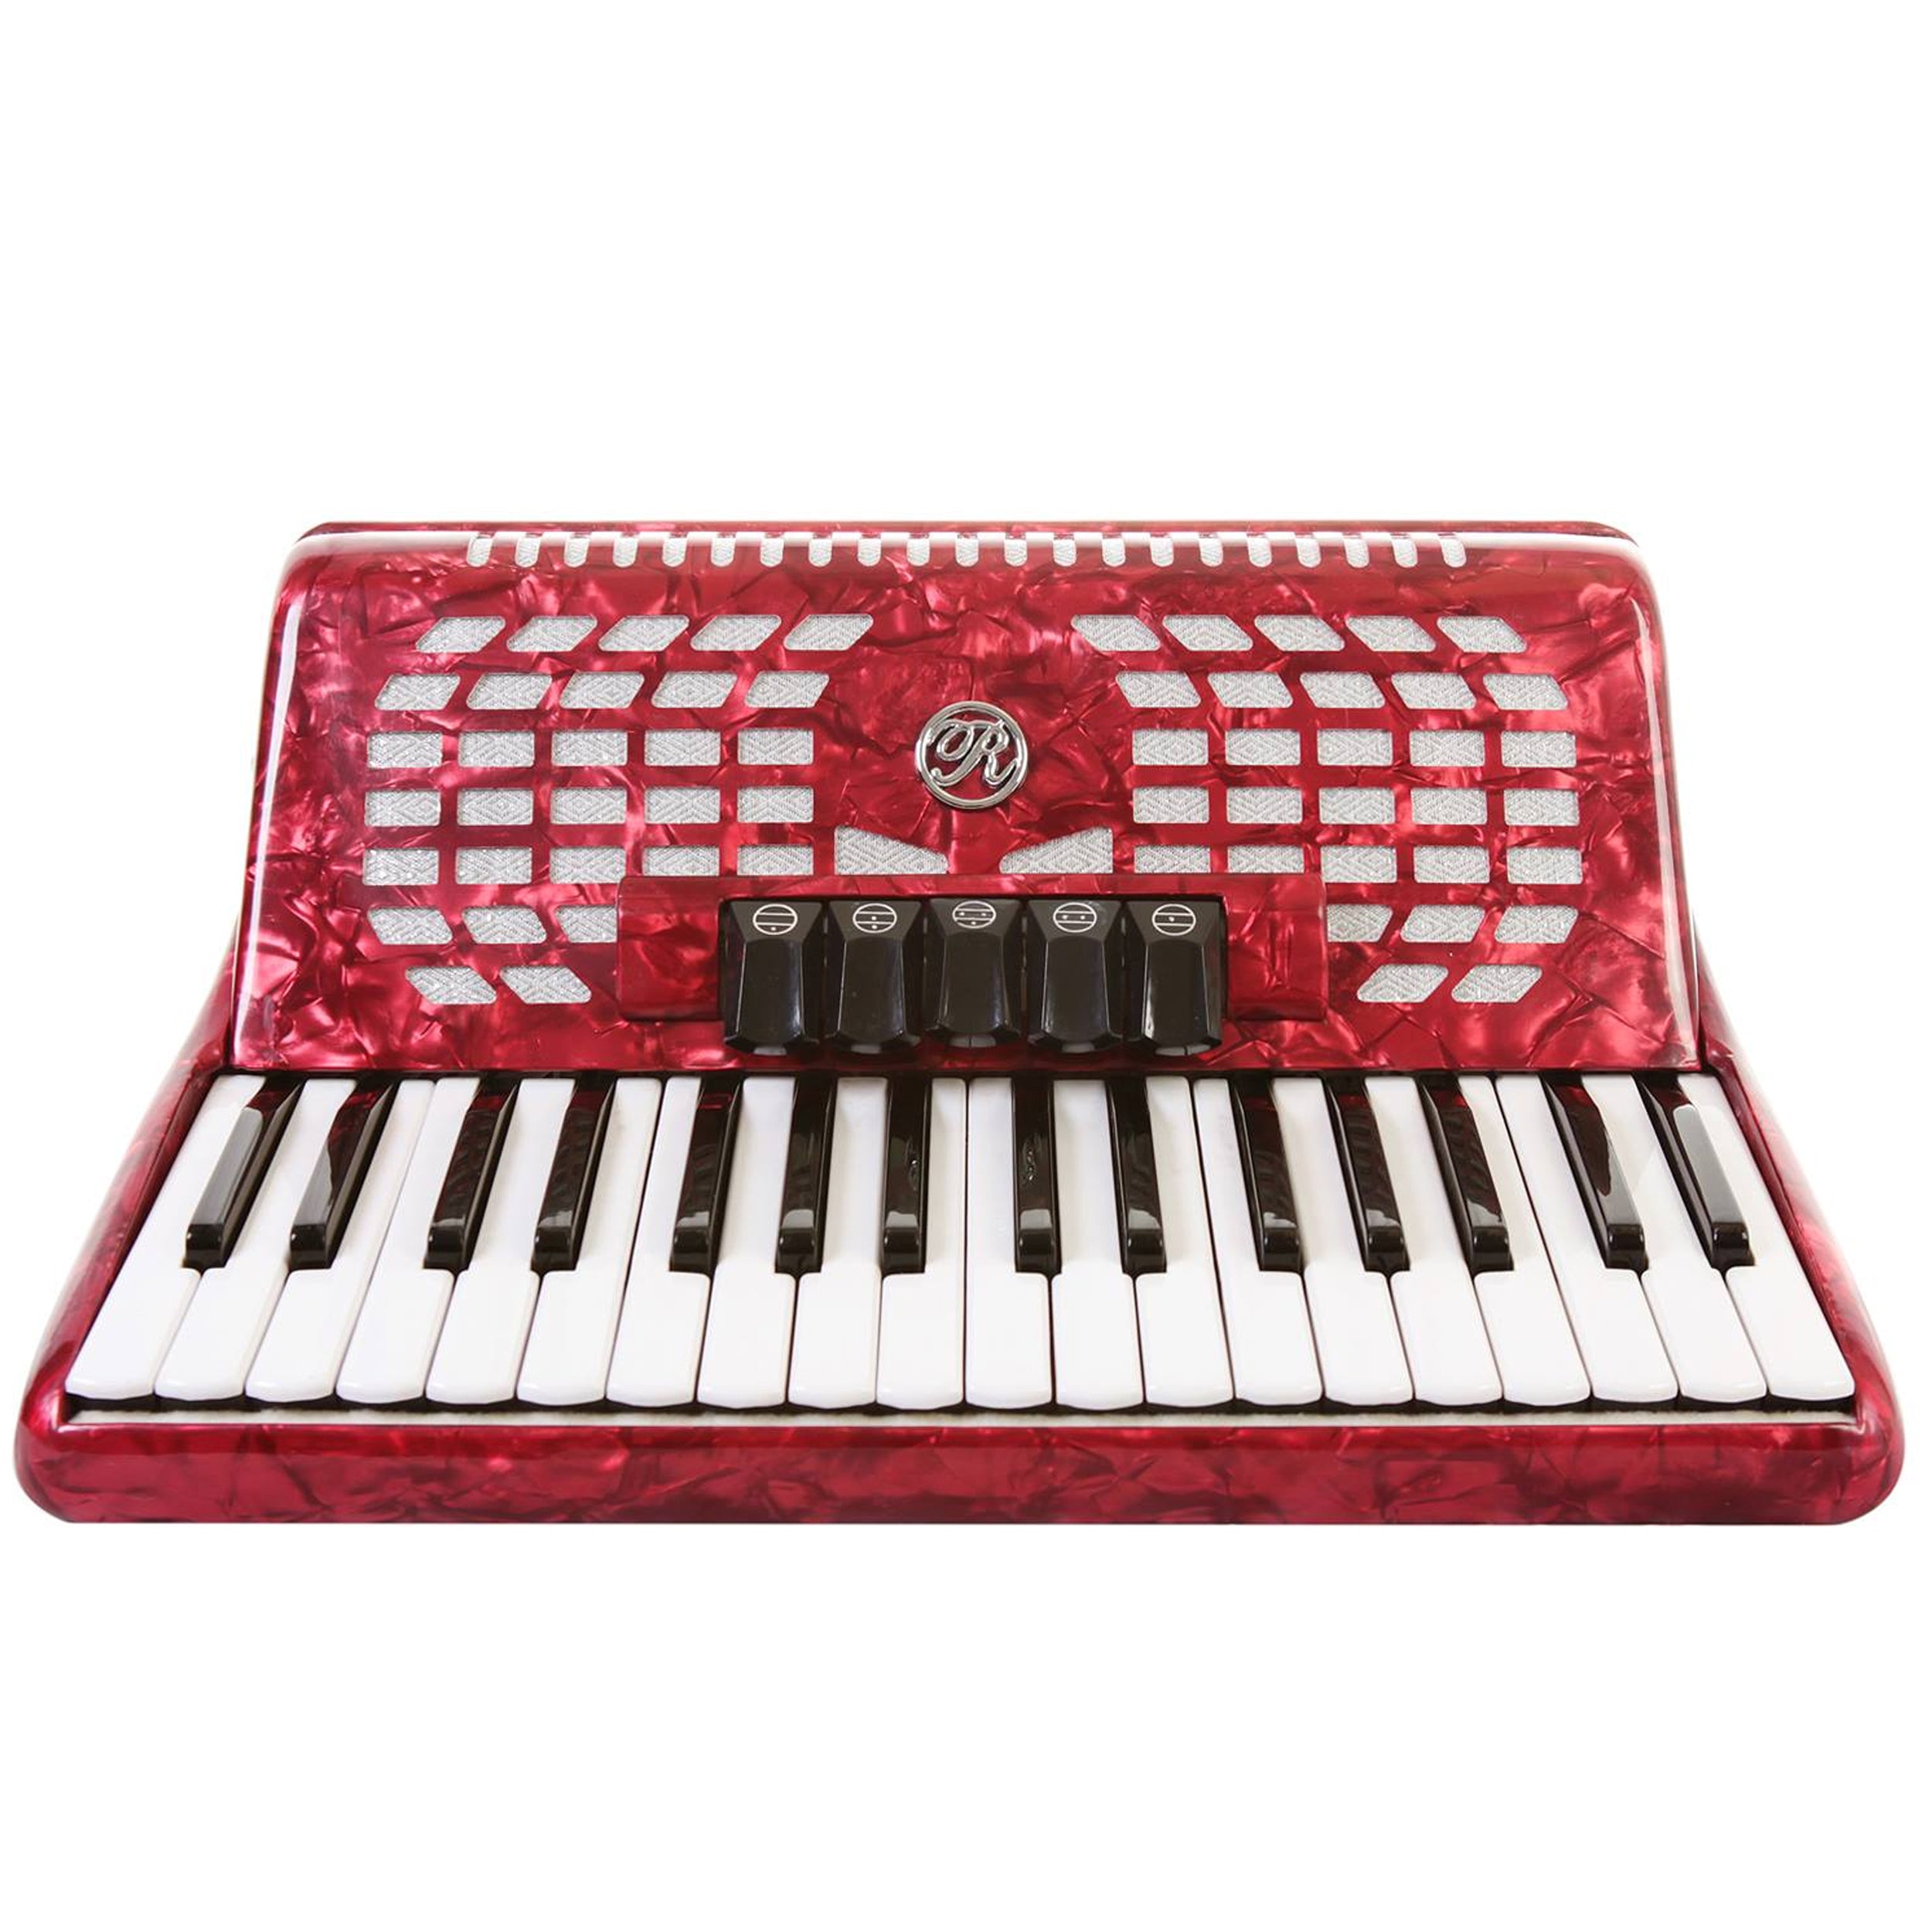 Rossetti Piano Accordion 60 Bass 34 Keys 5 Switches Red